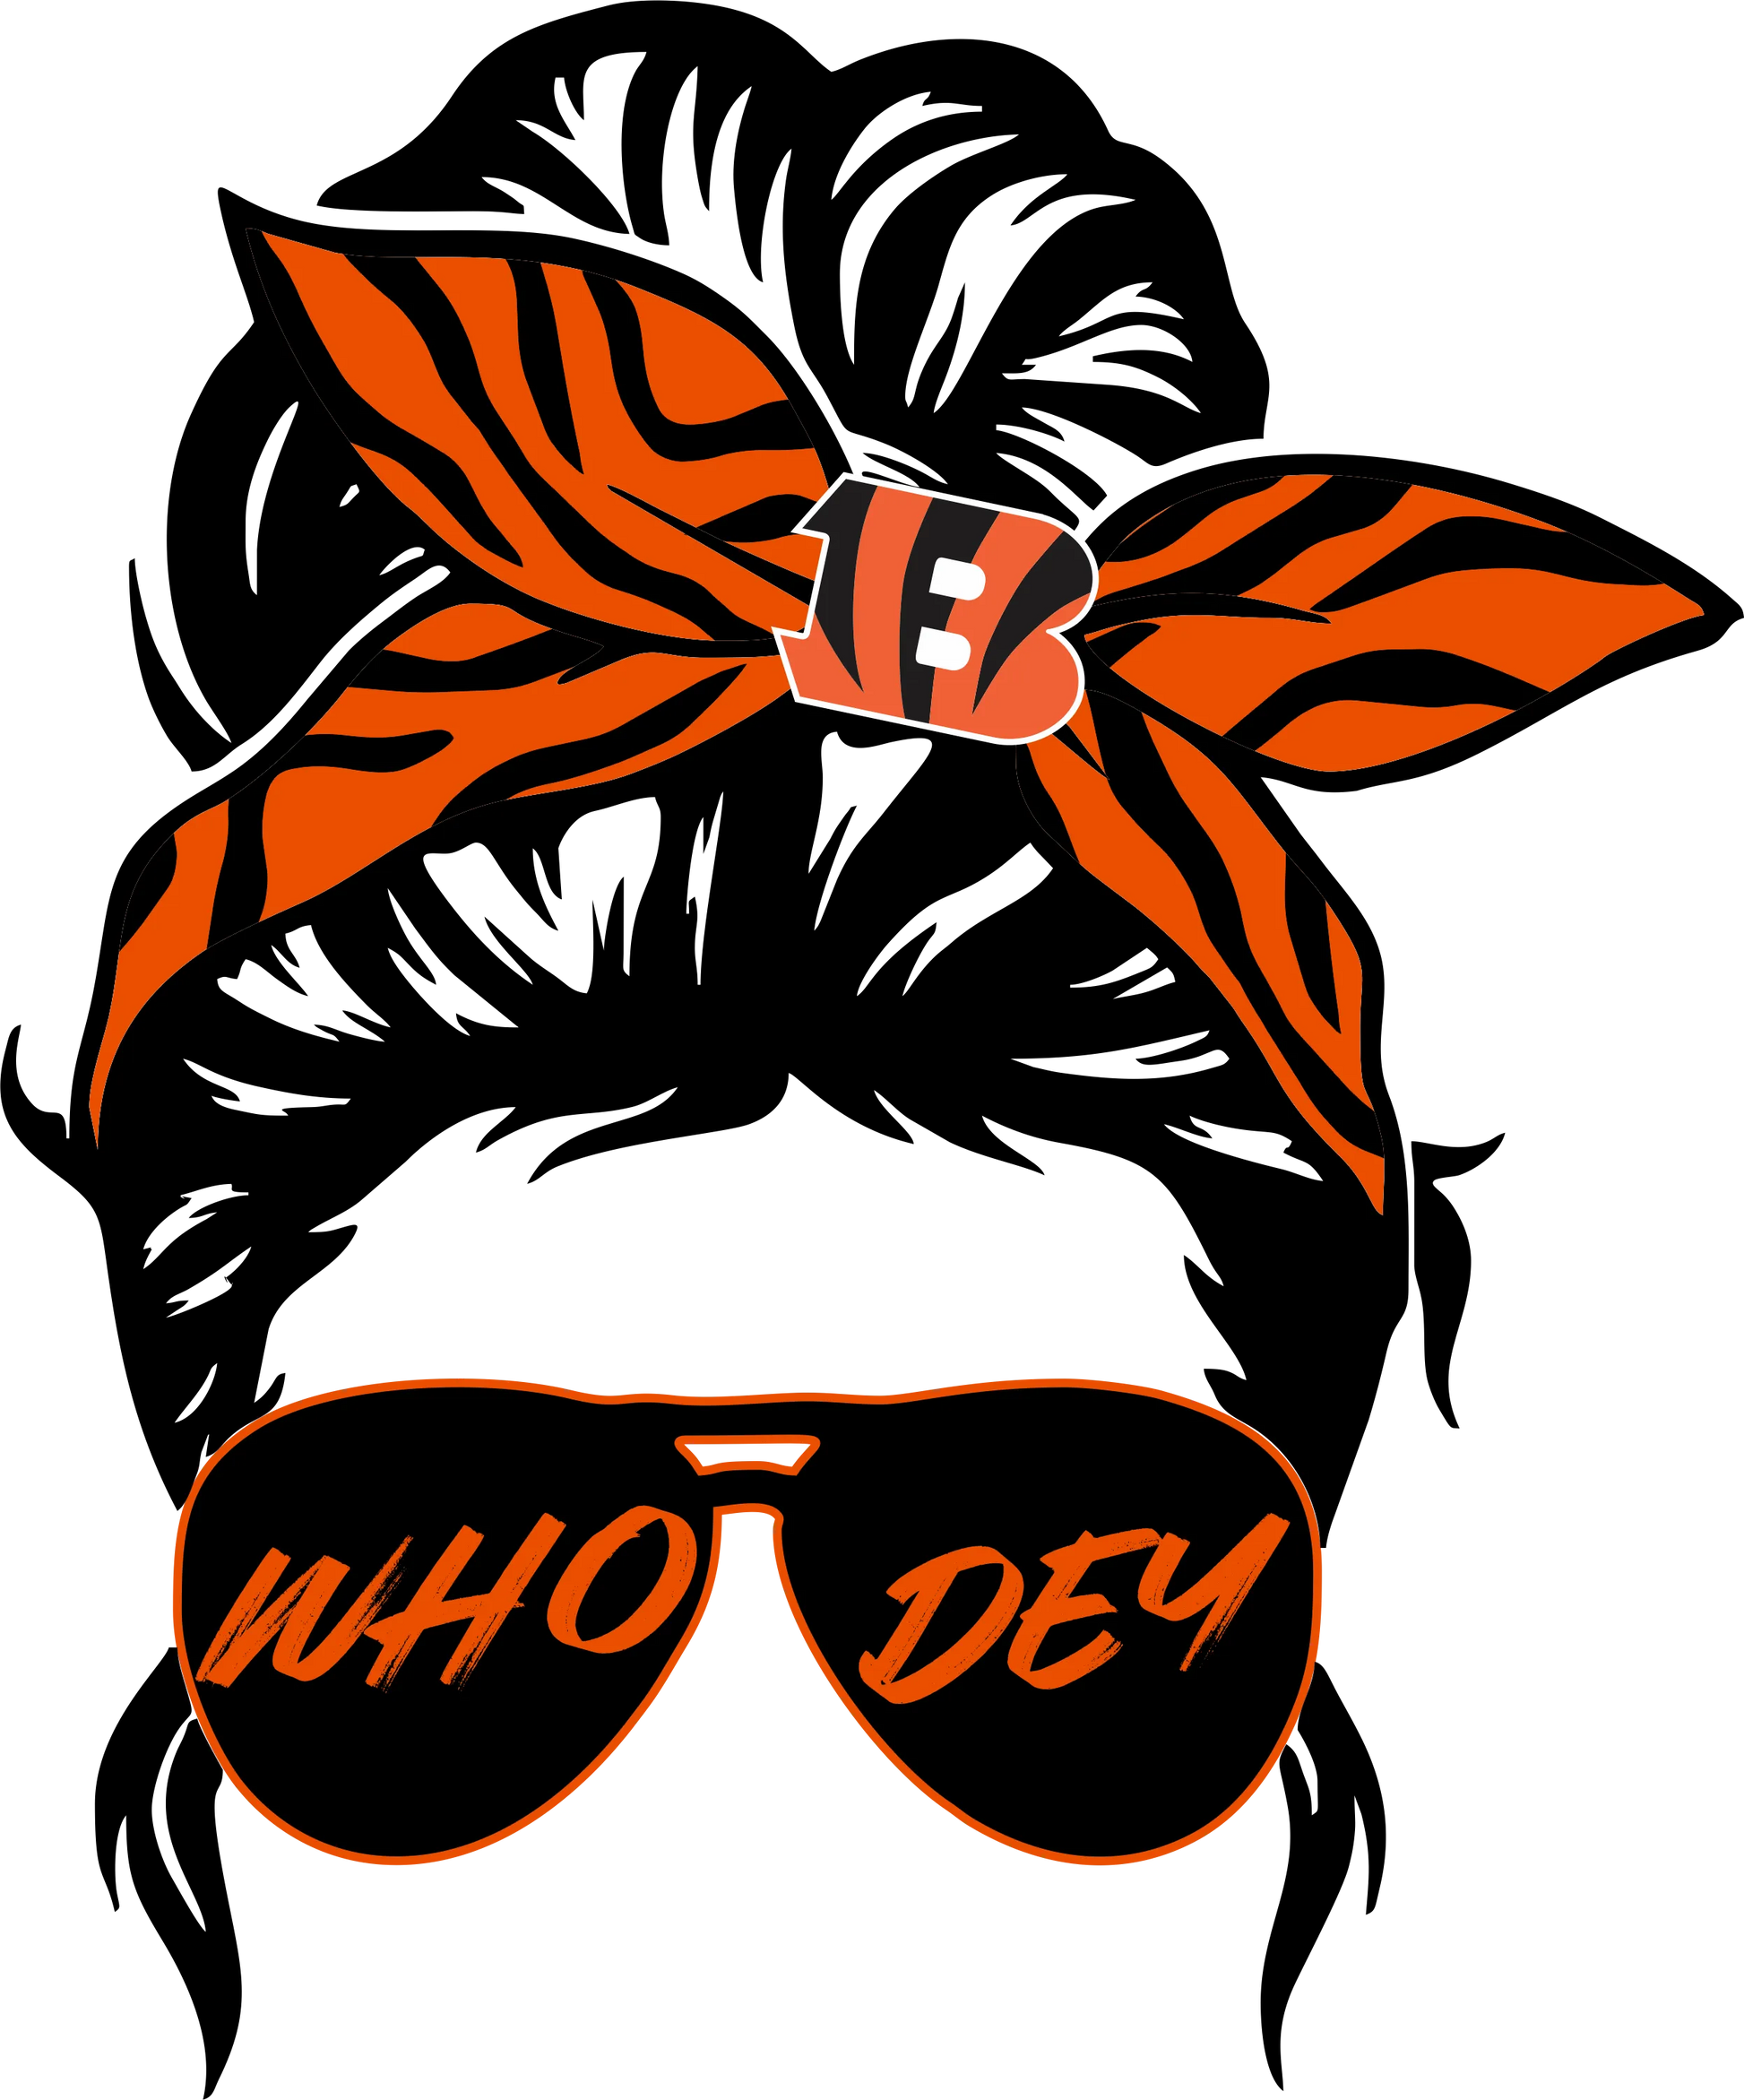 CB8 - "Lady Bengal Who Dey" DTF Transfer, DTF Transfer, Apparel & Accessories, Ace DTF